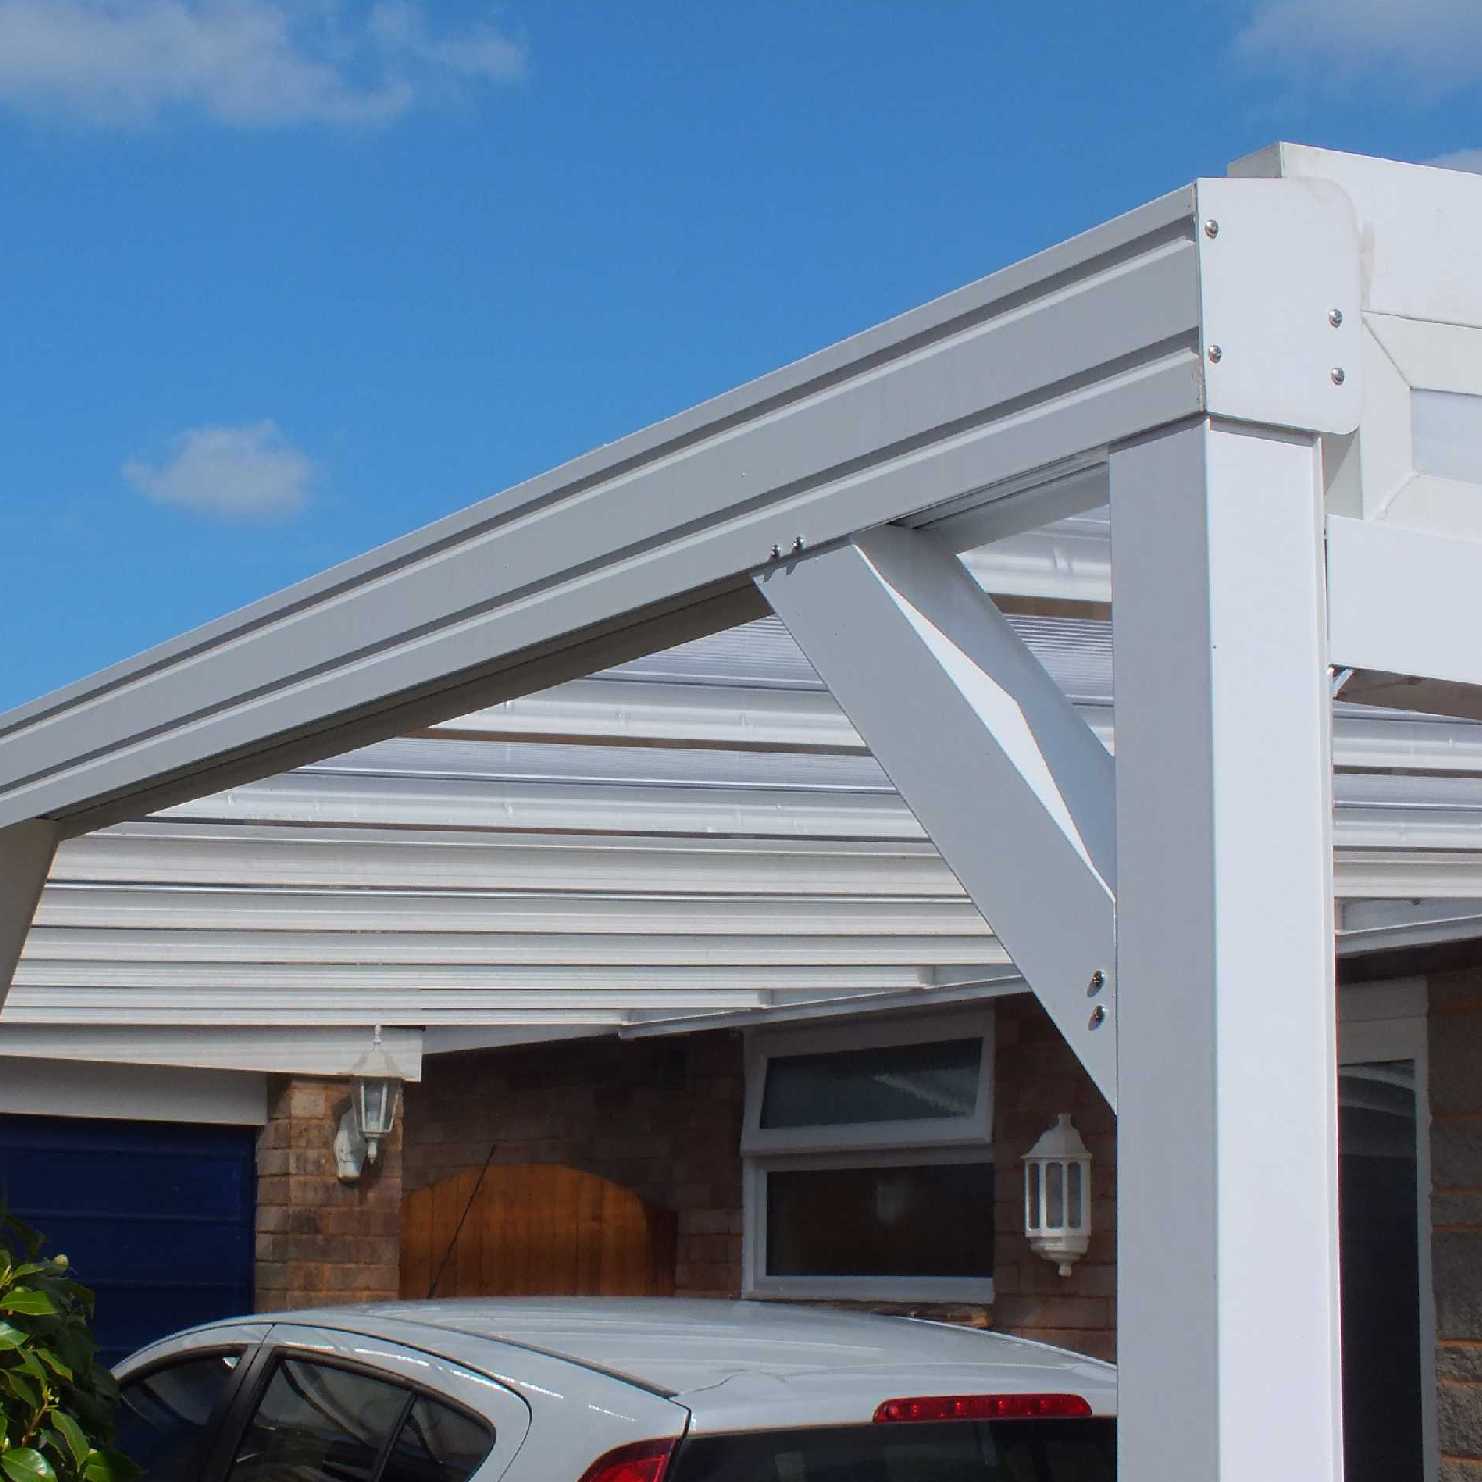 Buy Omega Smart Lean-To Canopy, White with 16mm Polycarbonate Glazing - 3.1m (W) x 2.5m (P), (2) Supporting Posts online today